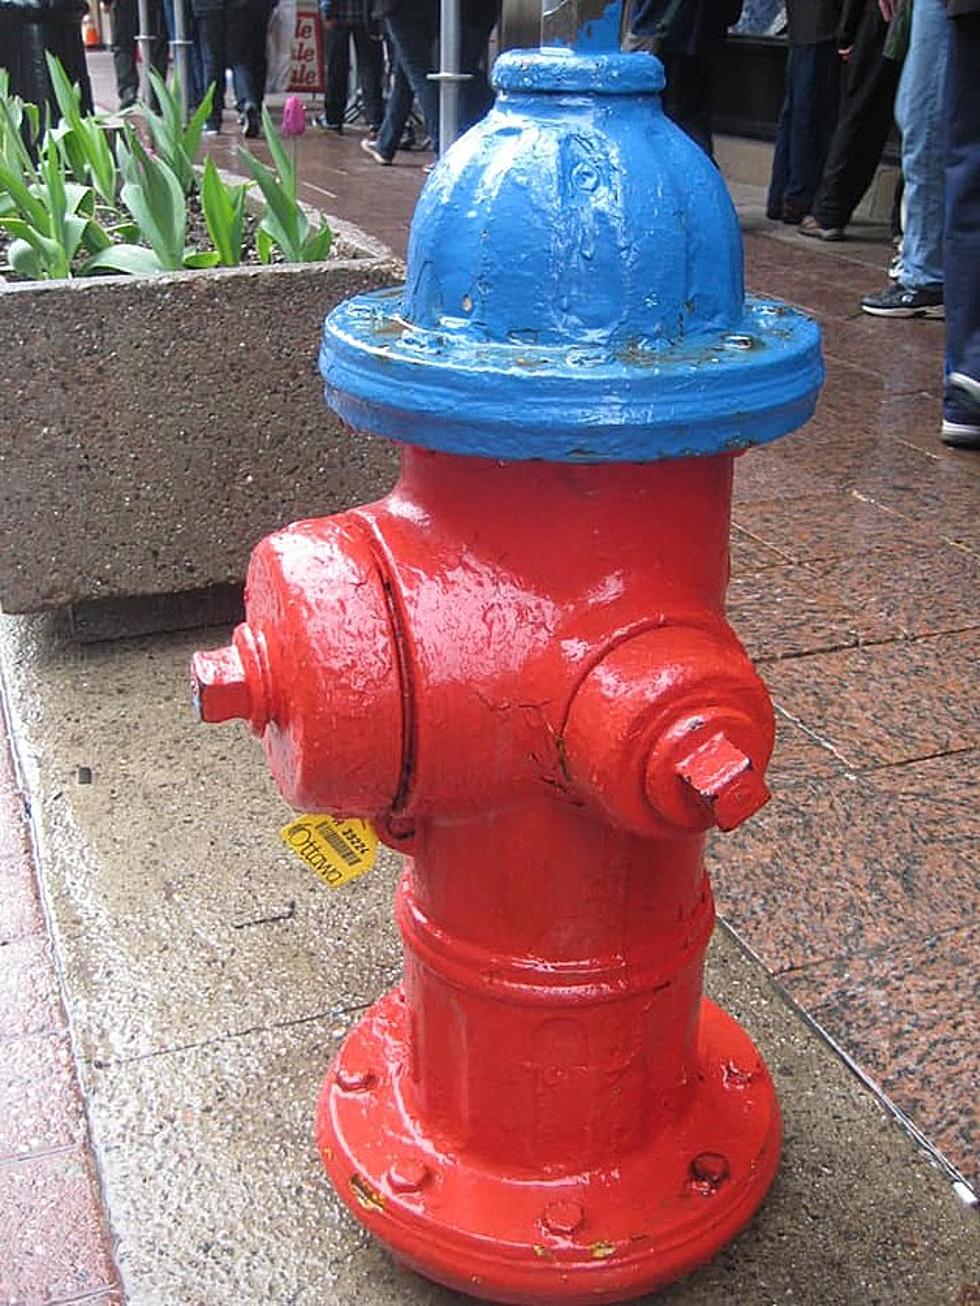 Why The Color Of Your Fire Hydrant In Massachusetts Matters